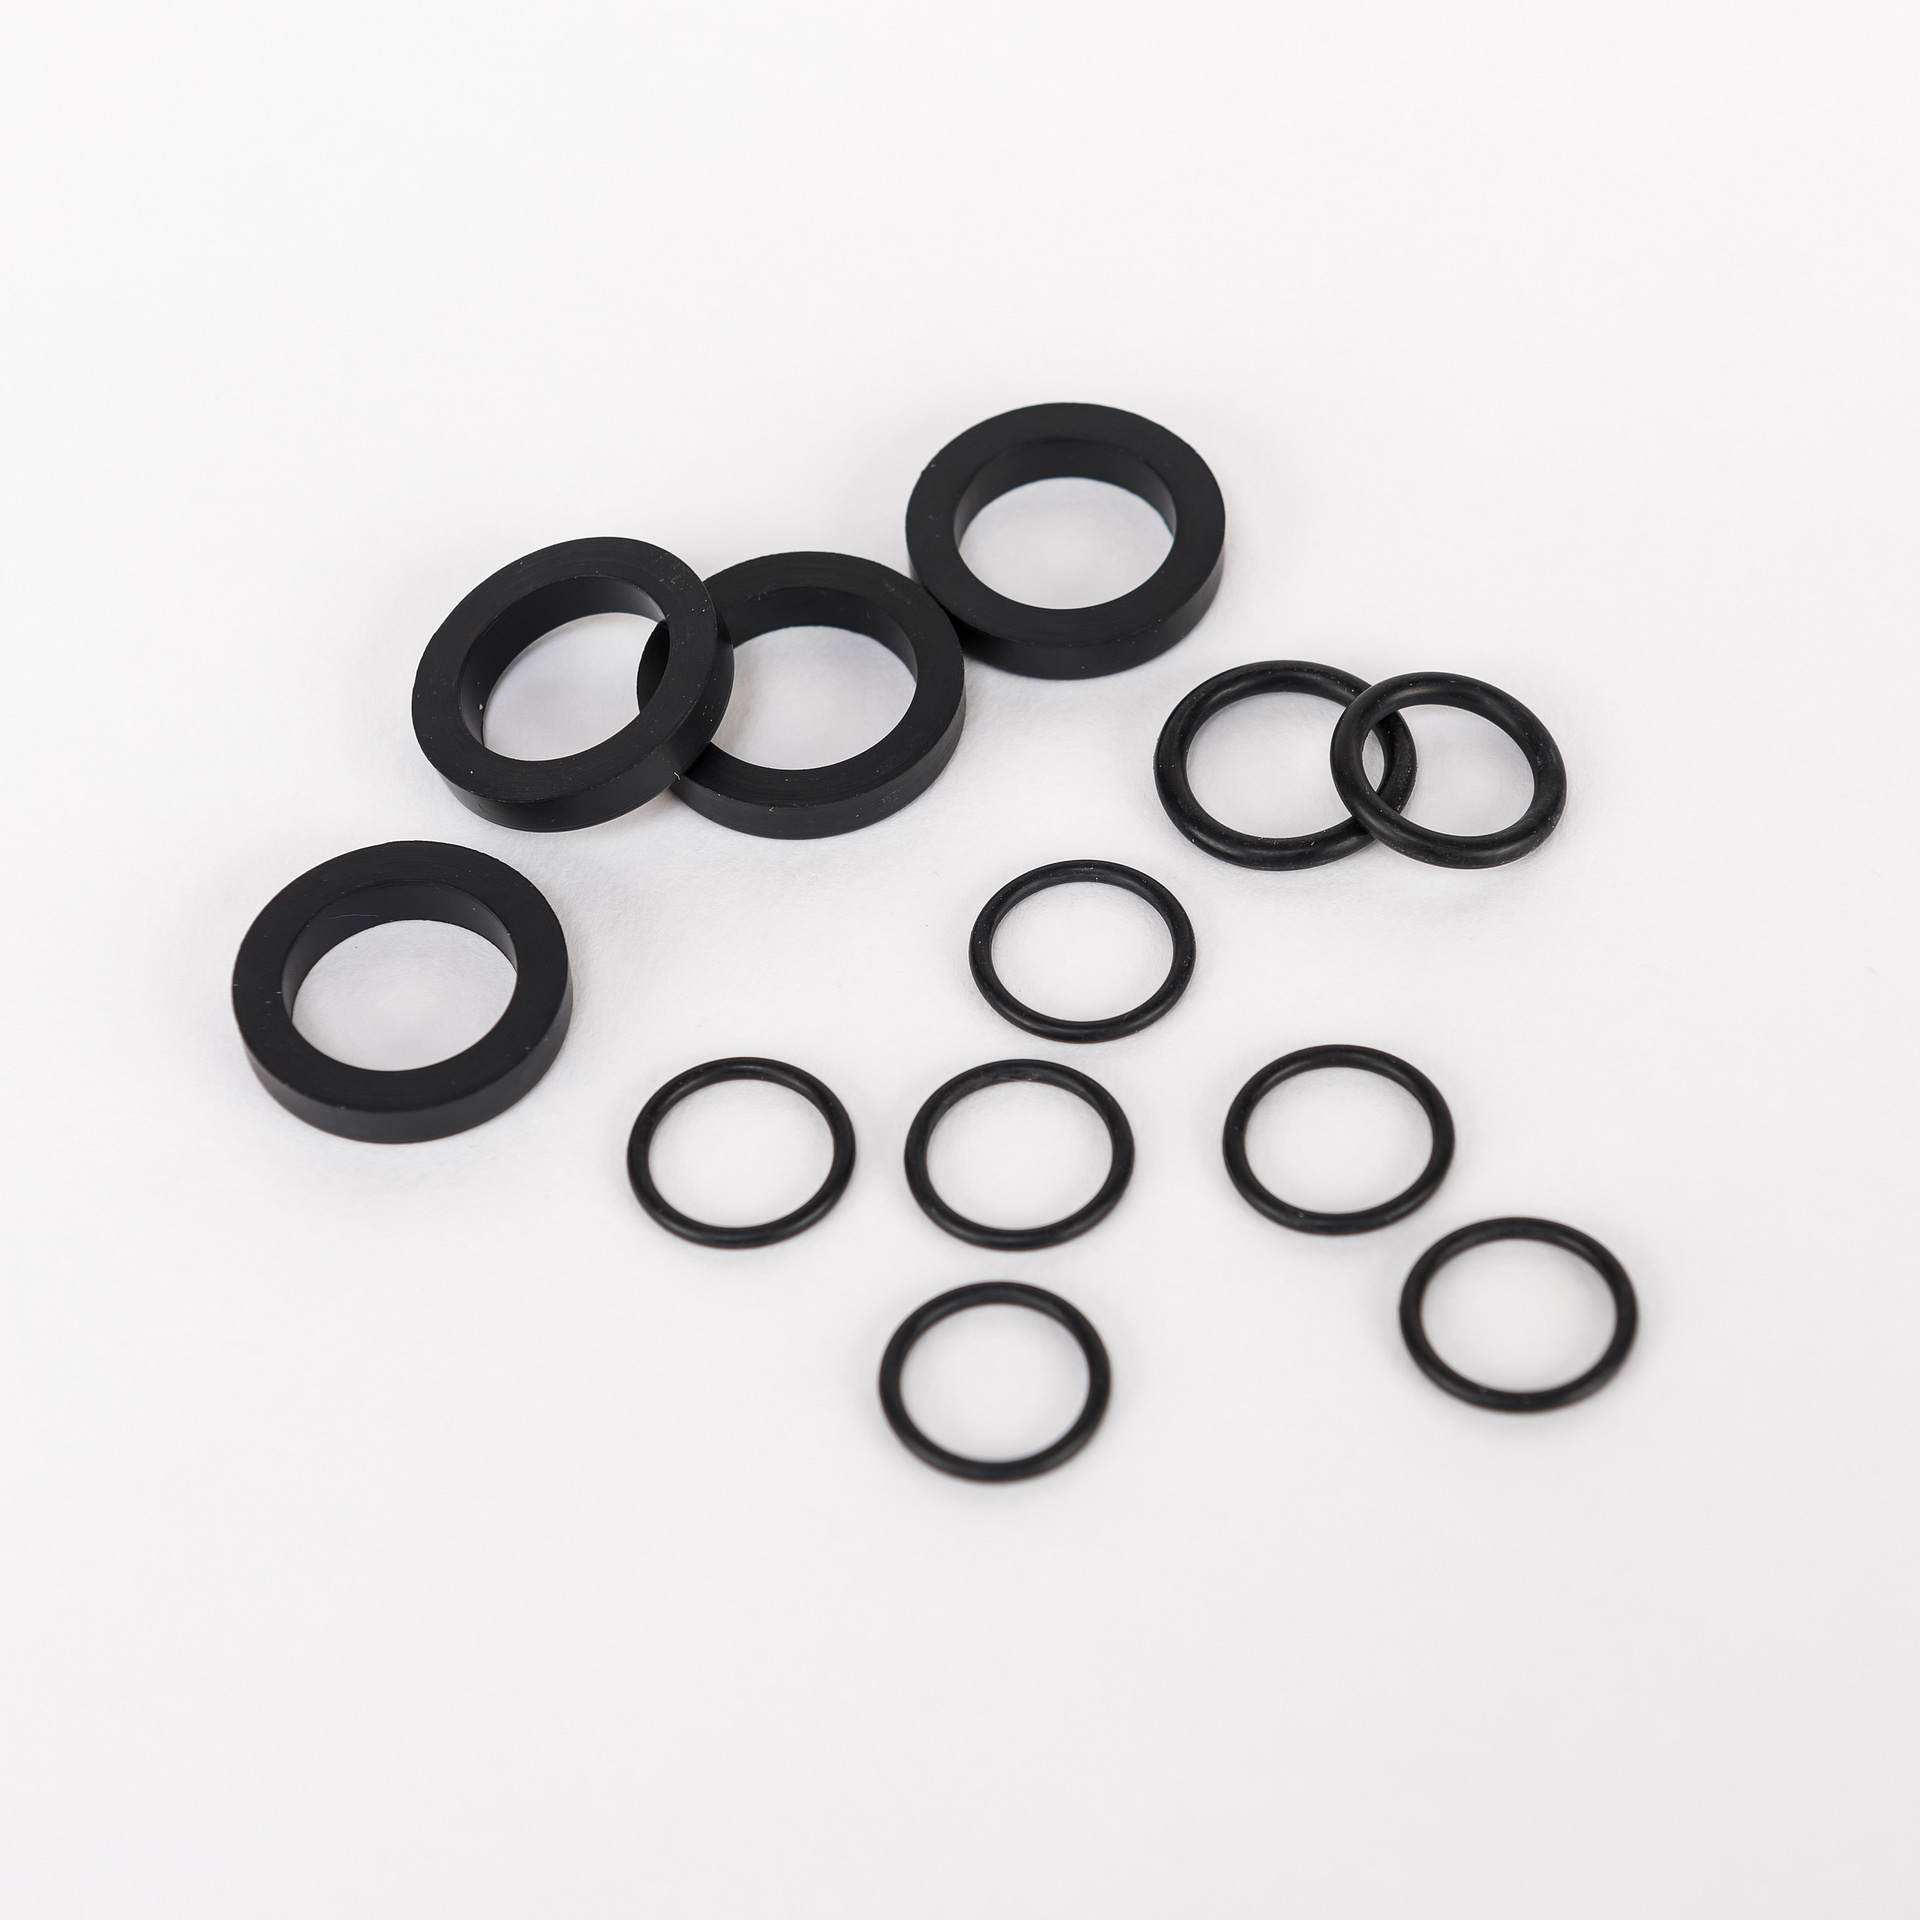 Bluemoon 10 Pcs - 50mm 2 Metal O-Rings Rings Non Welded